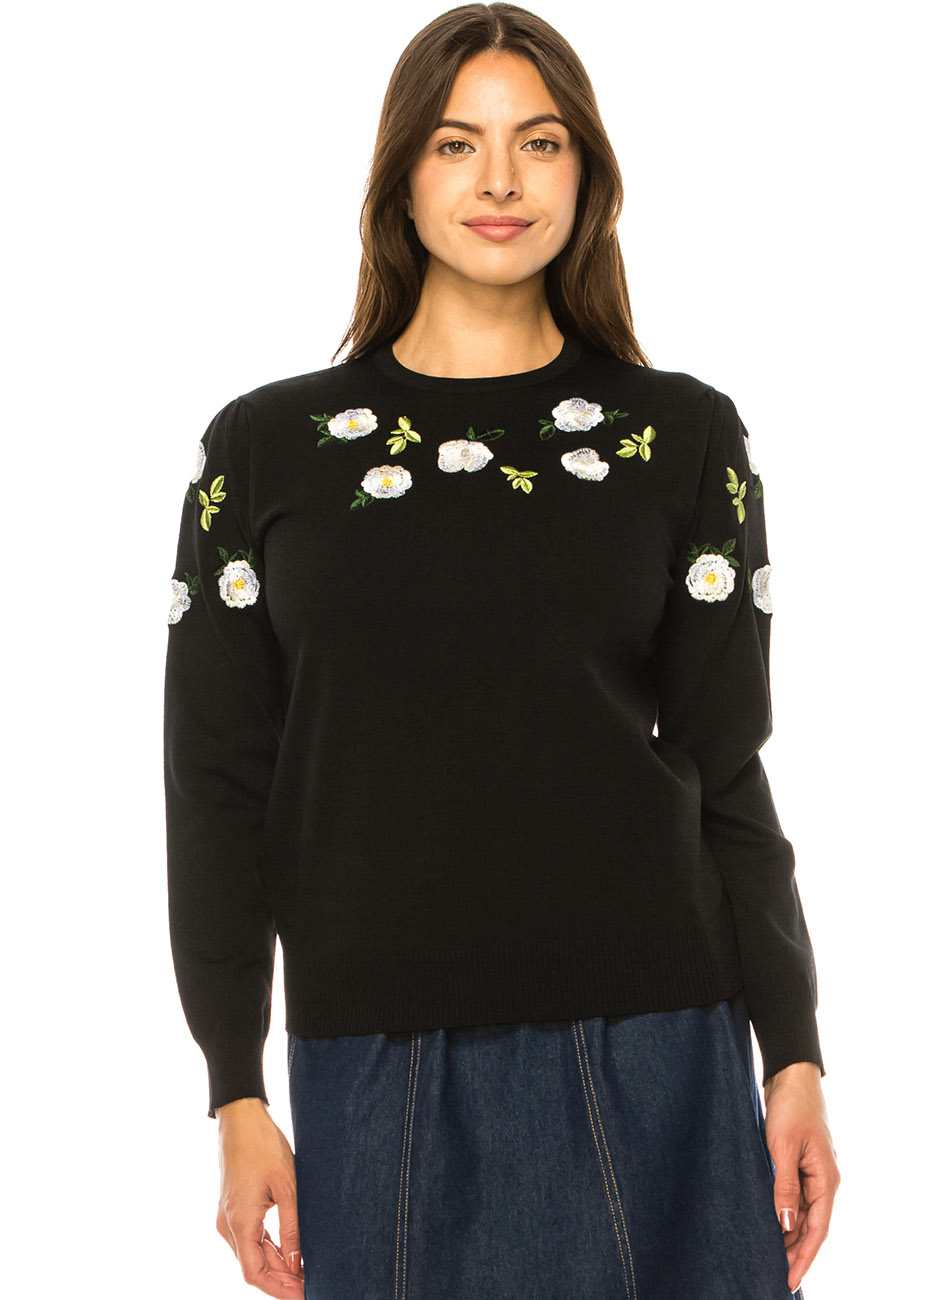 Blossoming Elegance Black Knit Sweater | Modest Women Clothing - YAL ...